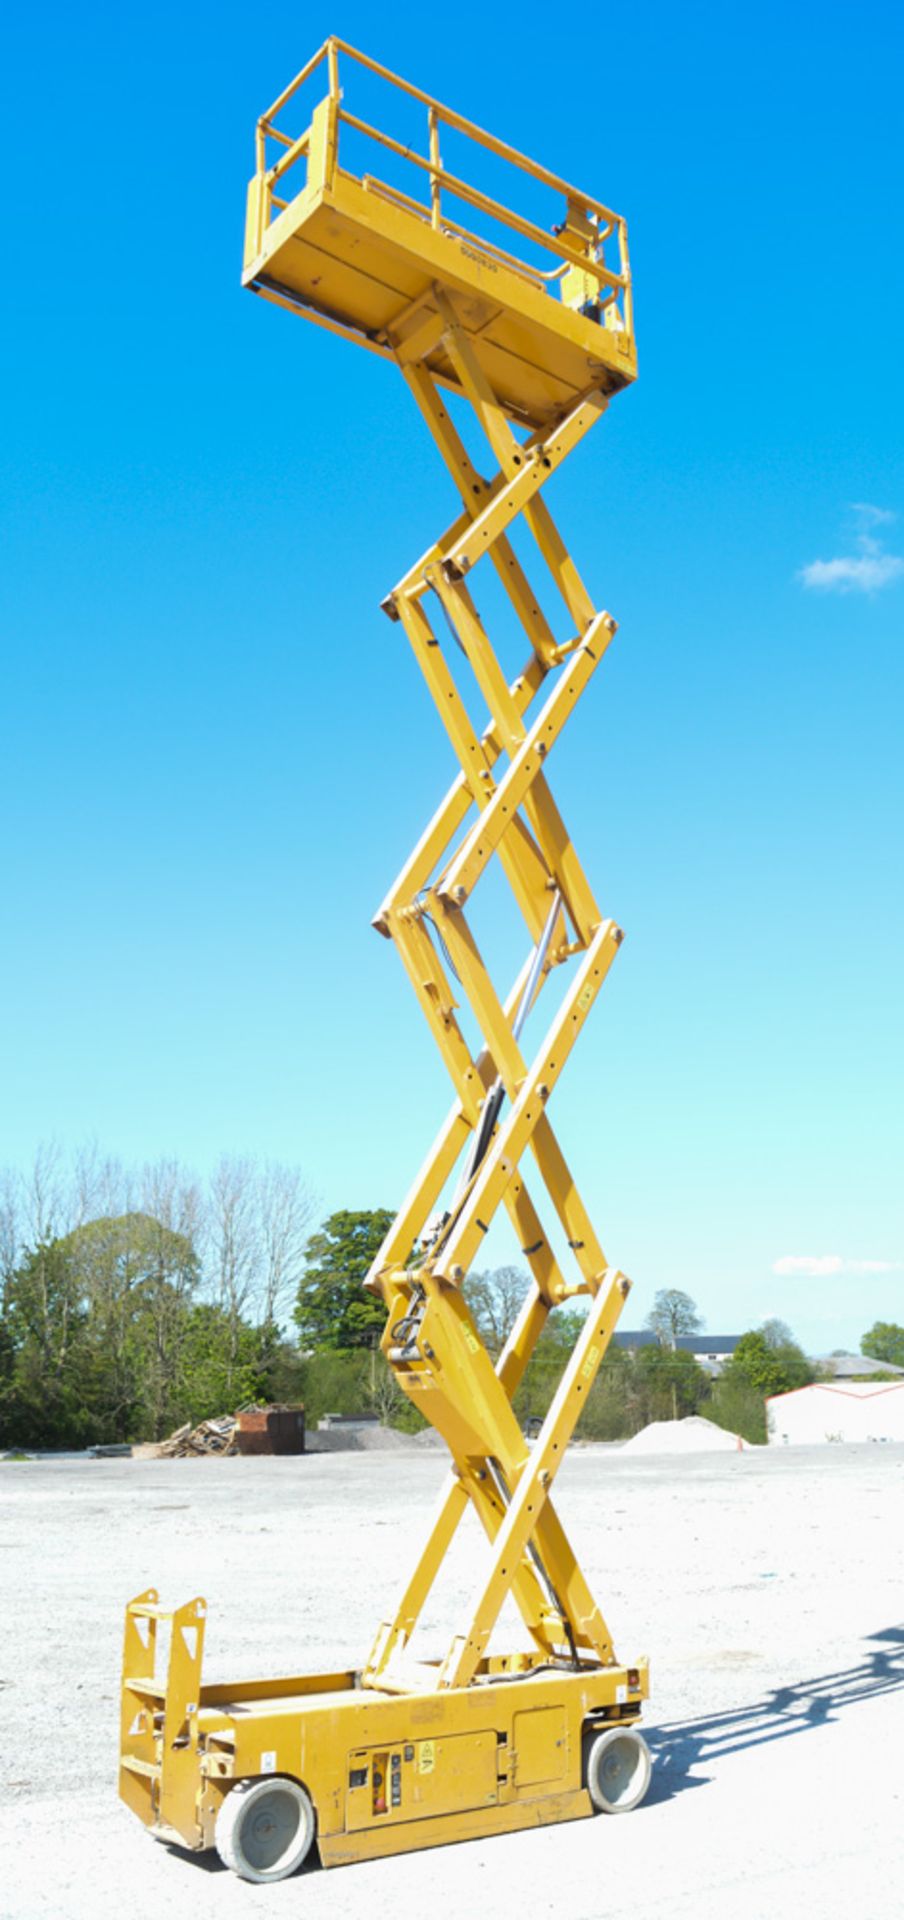 Genie 2632 26 ft battery electric scissor lift access platform Year: 2008 S/N: 90453 Recorded Hours: - Image 5 of 5